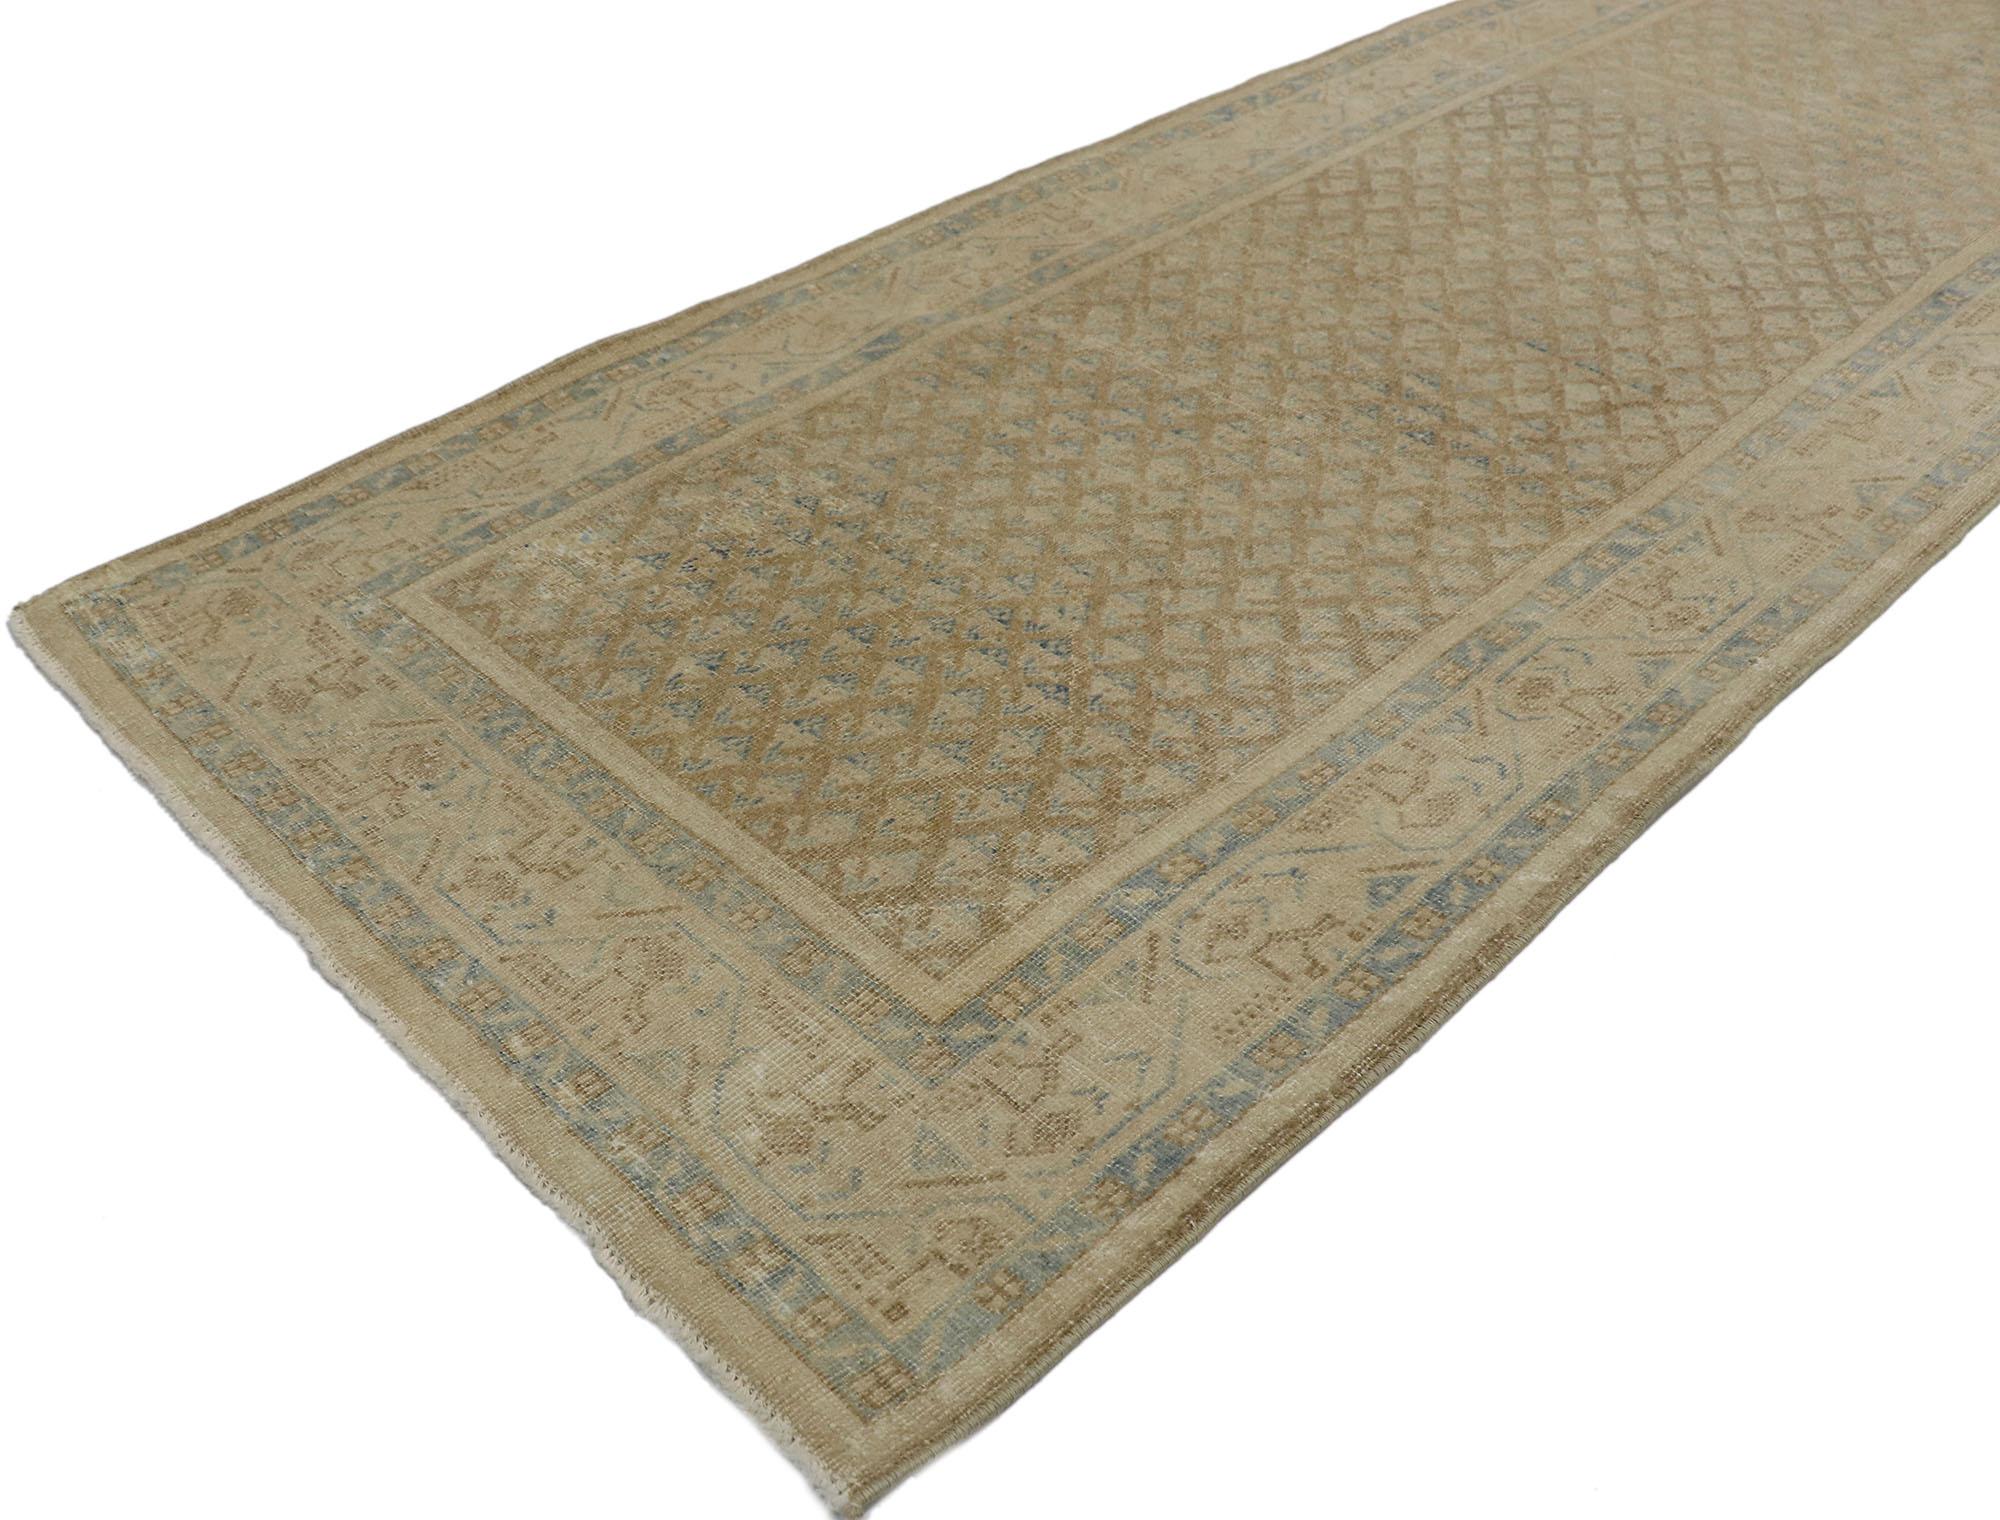 Shaker Distressed Antique Persian Saraband Runner with Mir Boteh Design